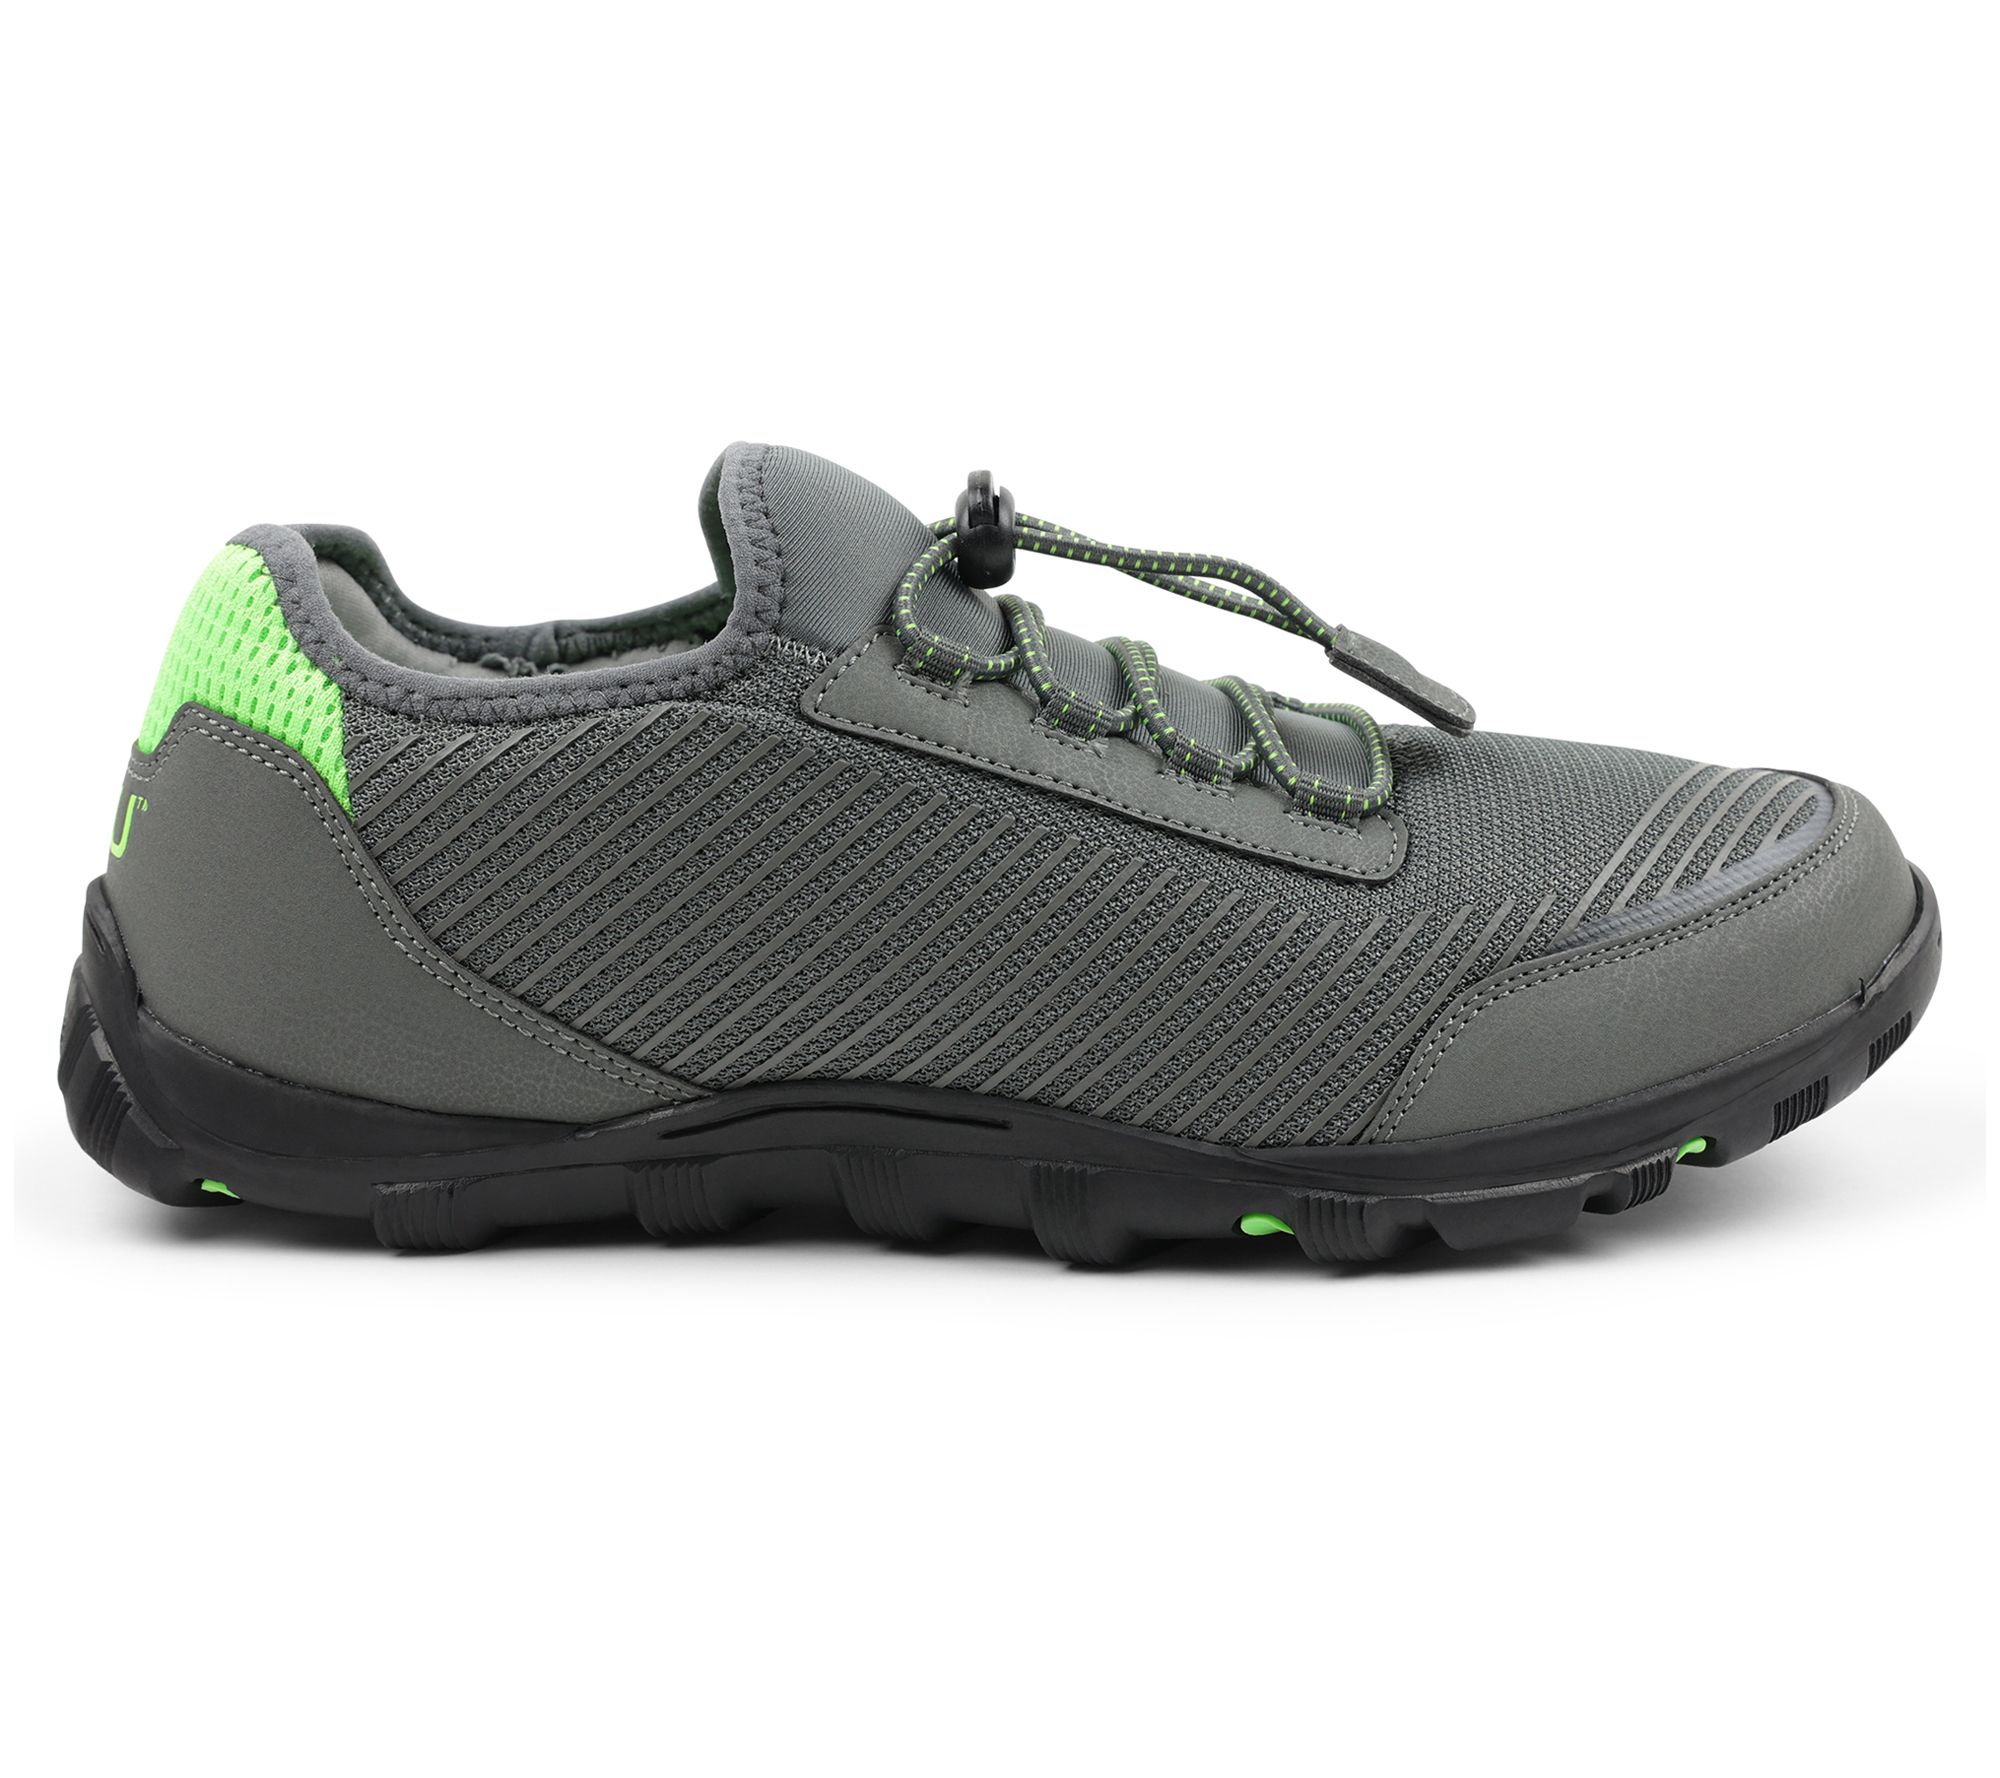 World Wide Sportsman Clear Creek Water Shoes for Men - Grey/White